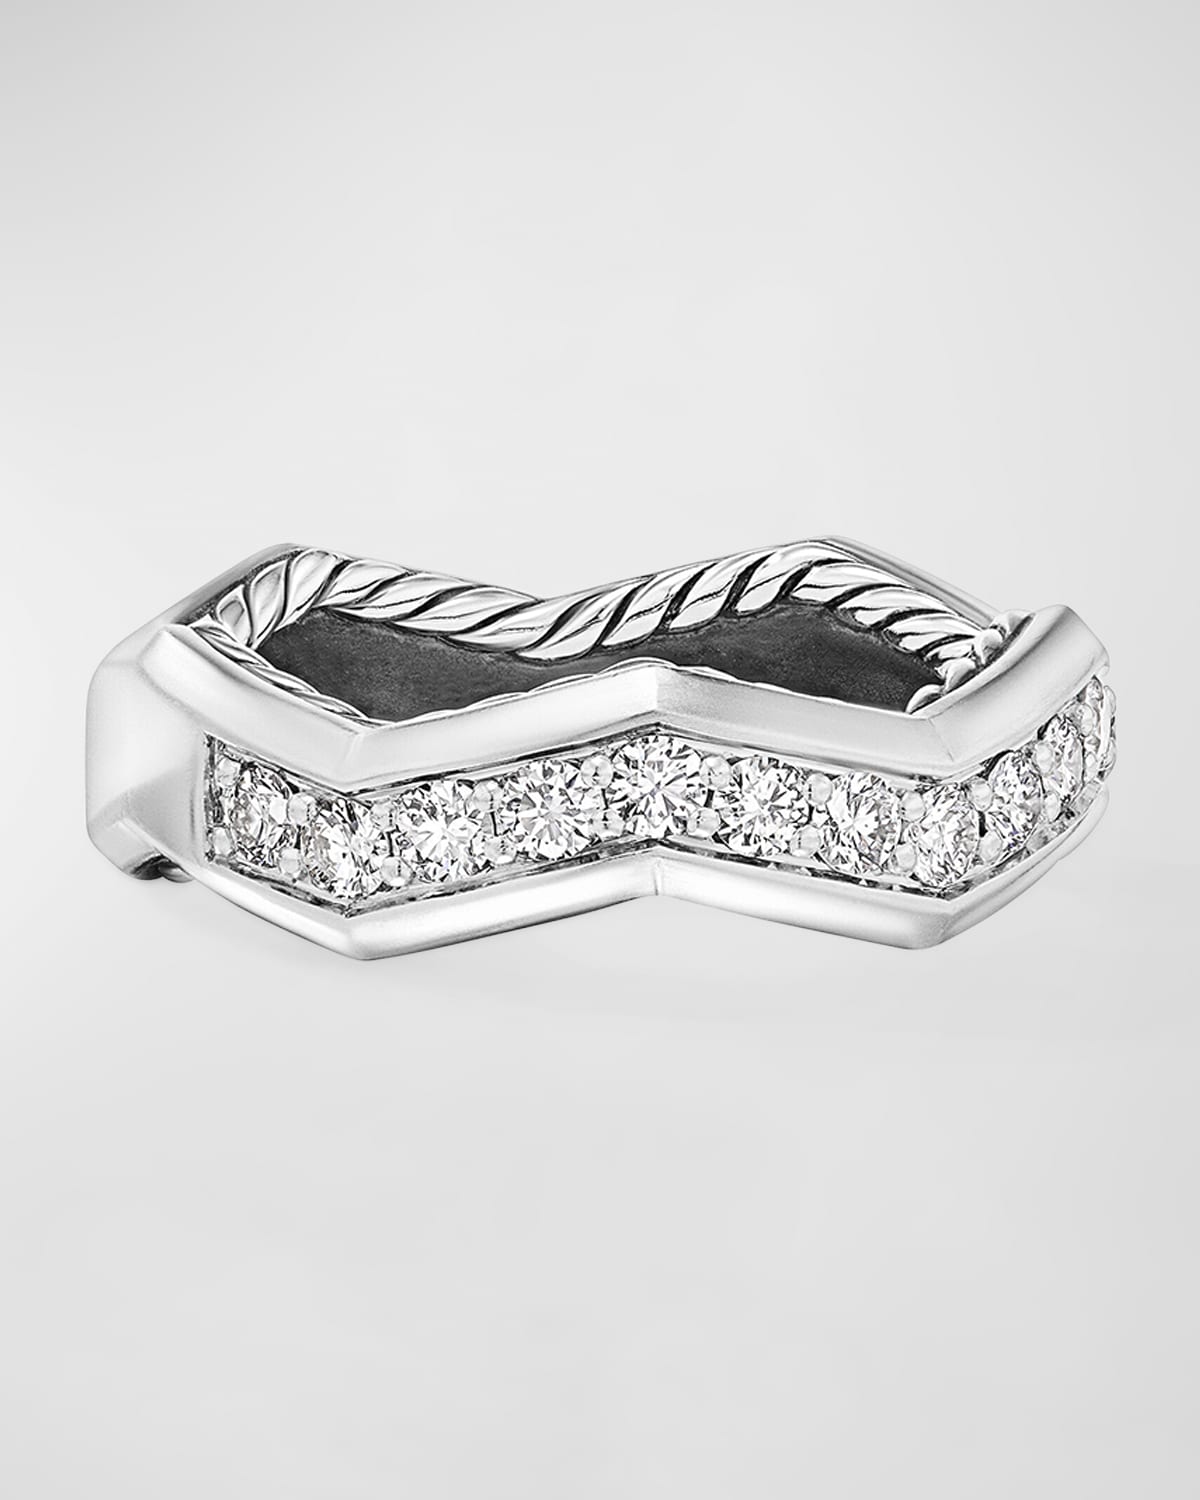 Pave Stax Ring with Diamonds in Silver, 5mm